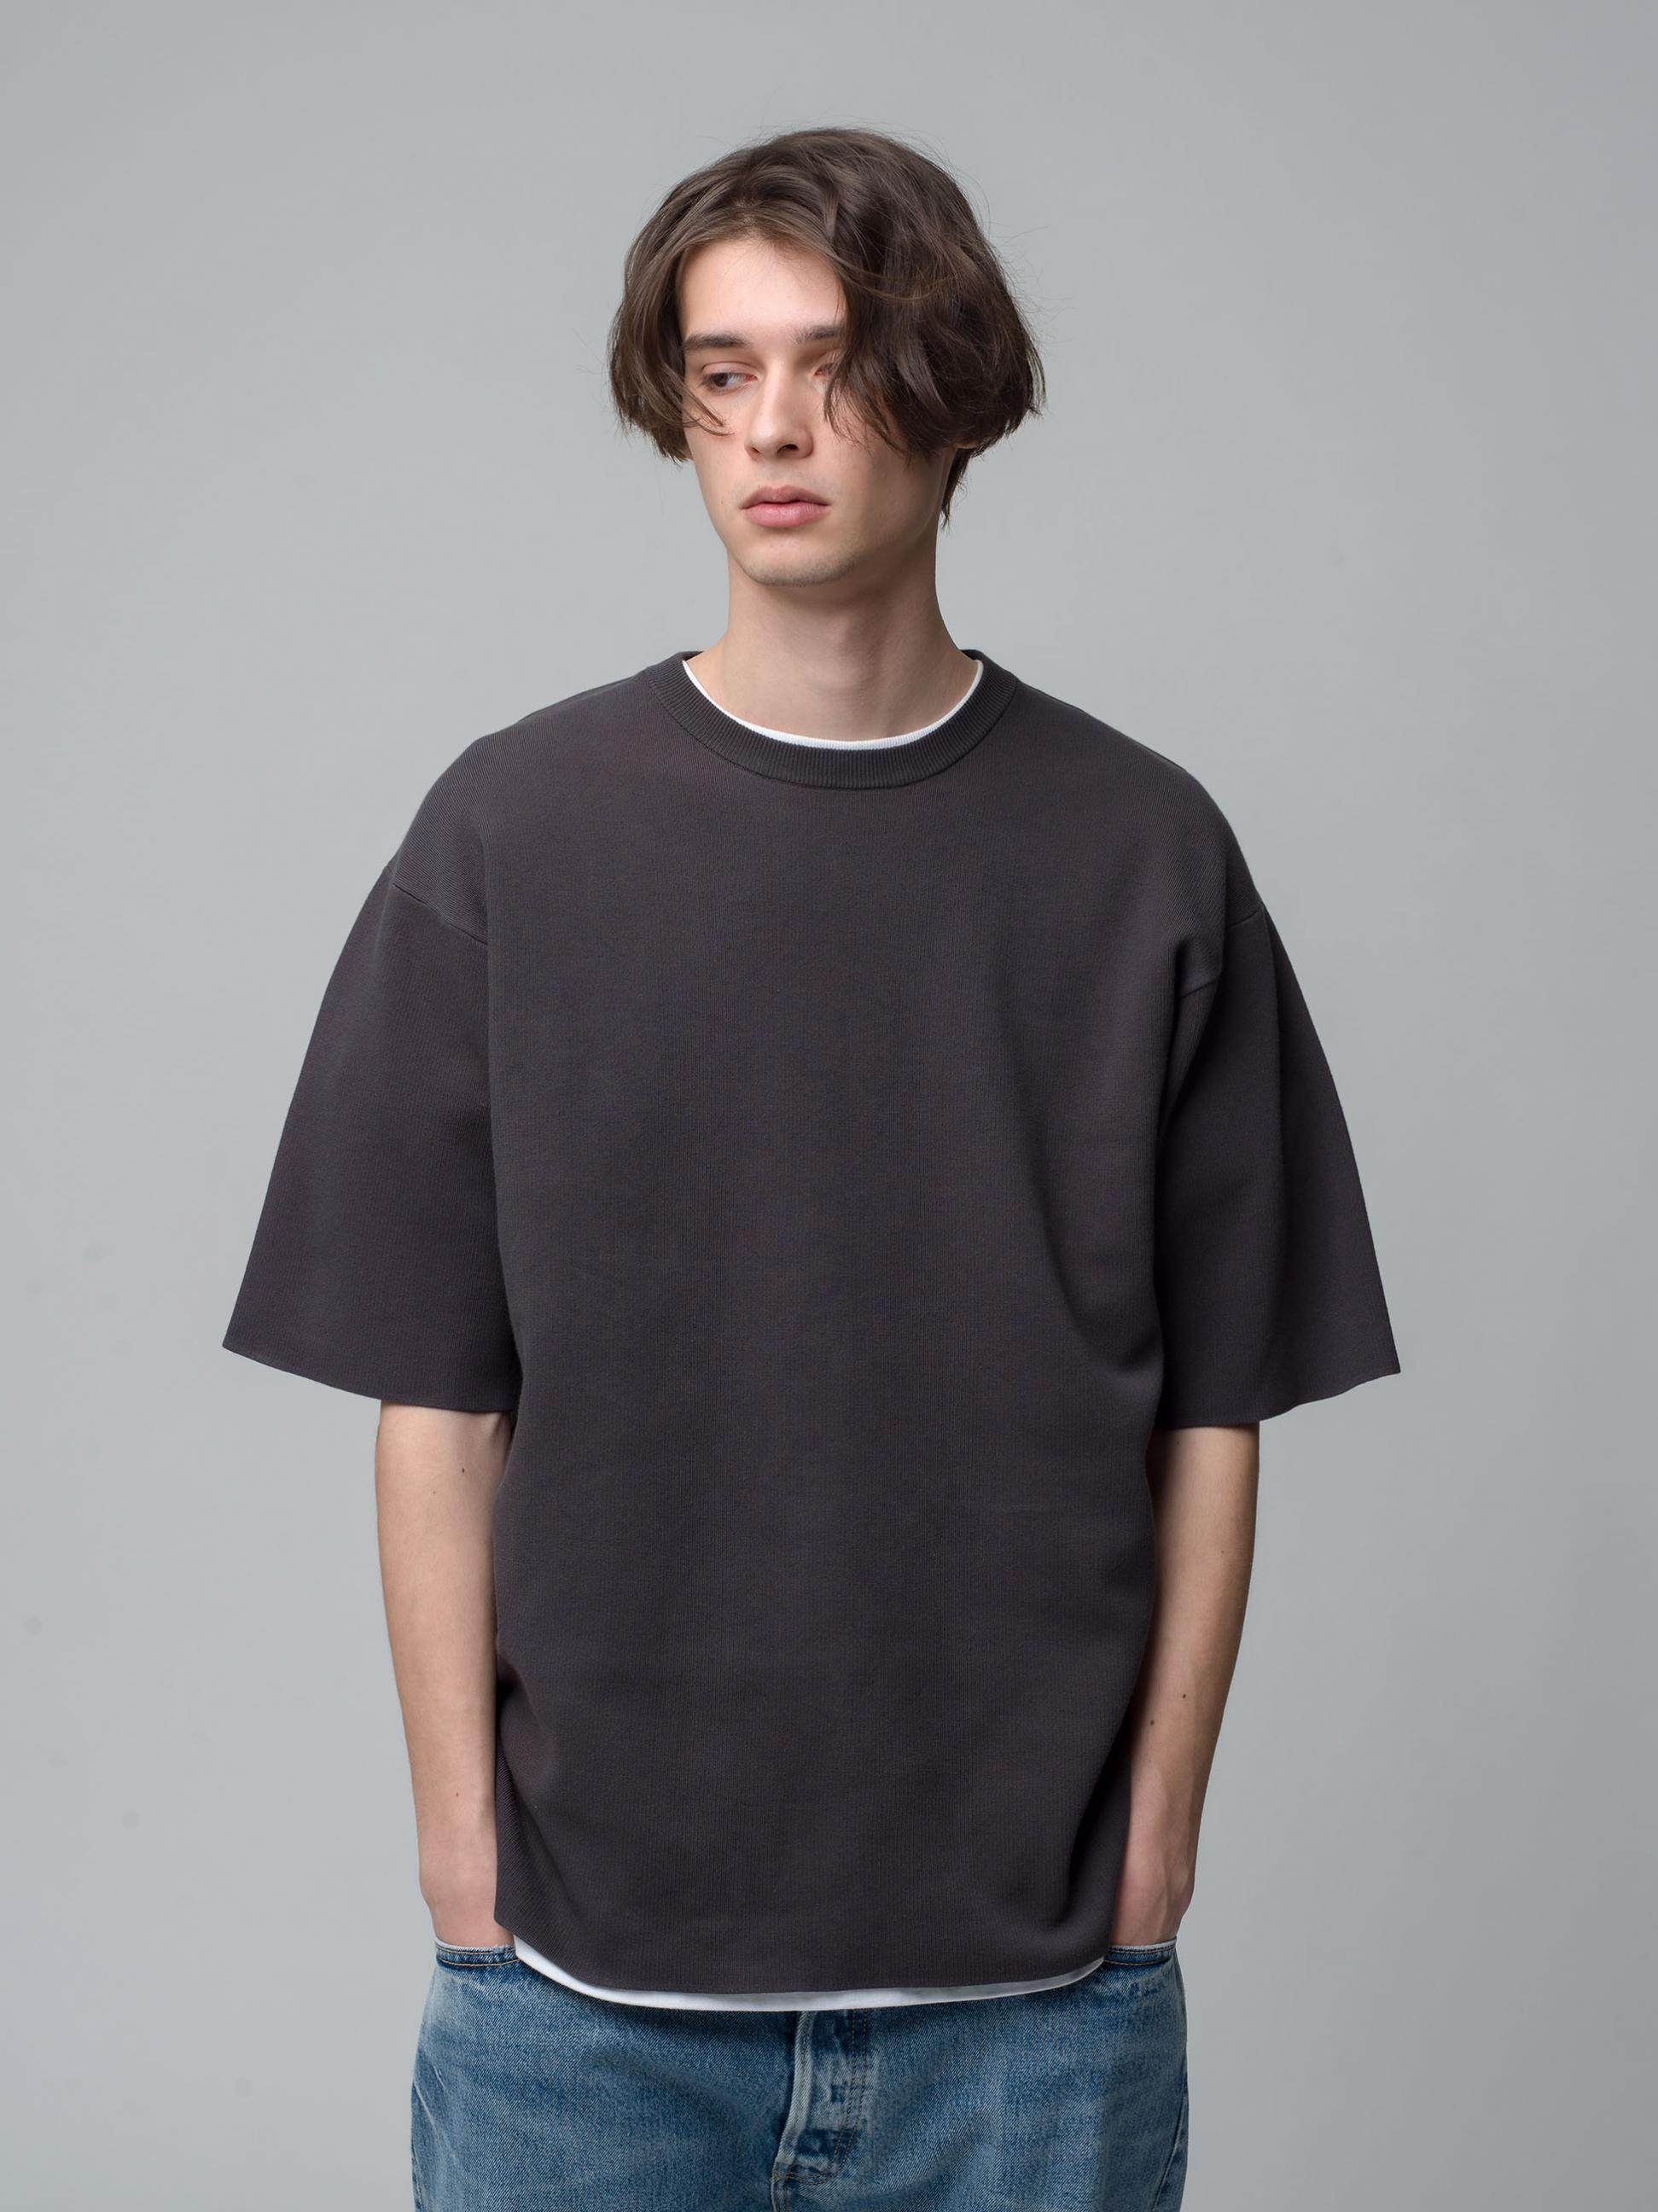 Smooth Knit T-Shirts